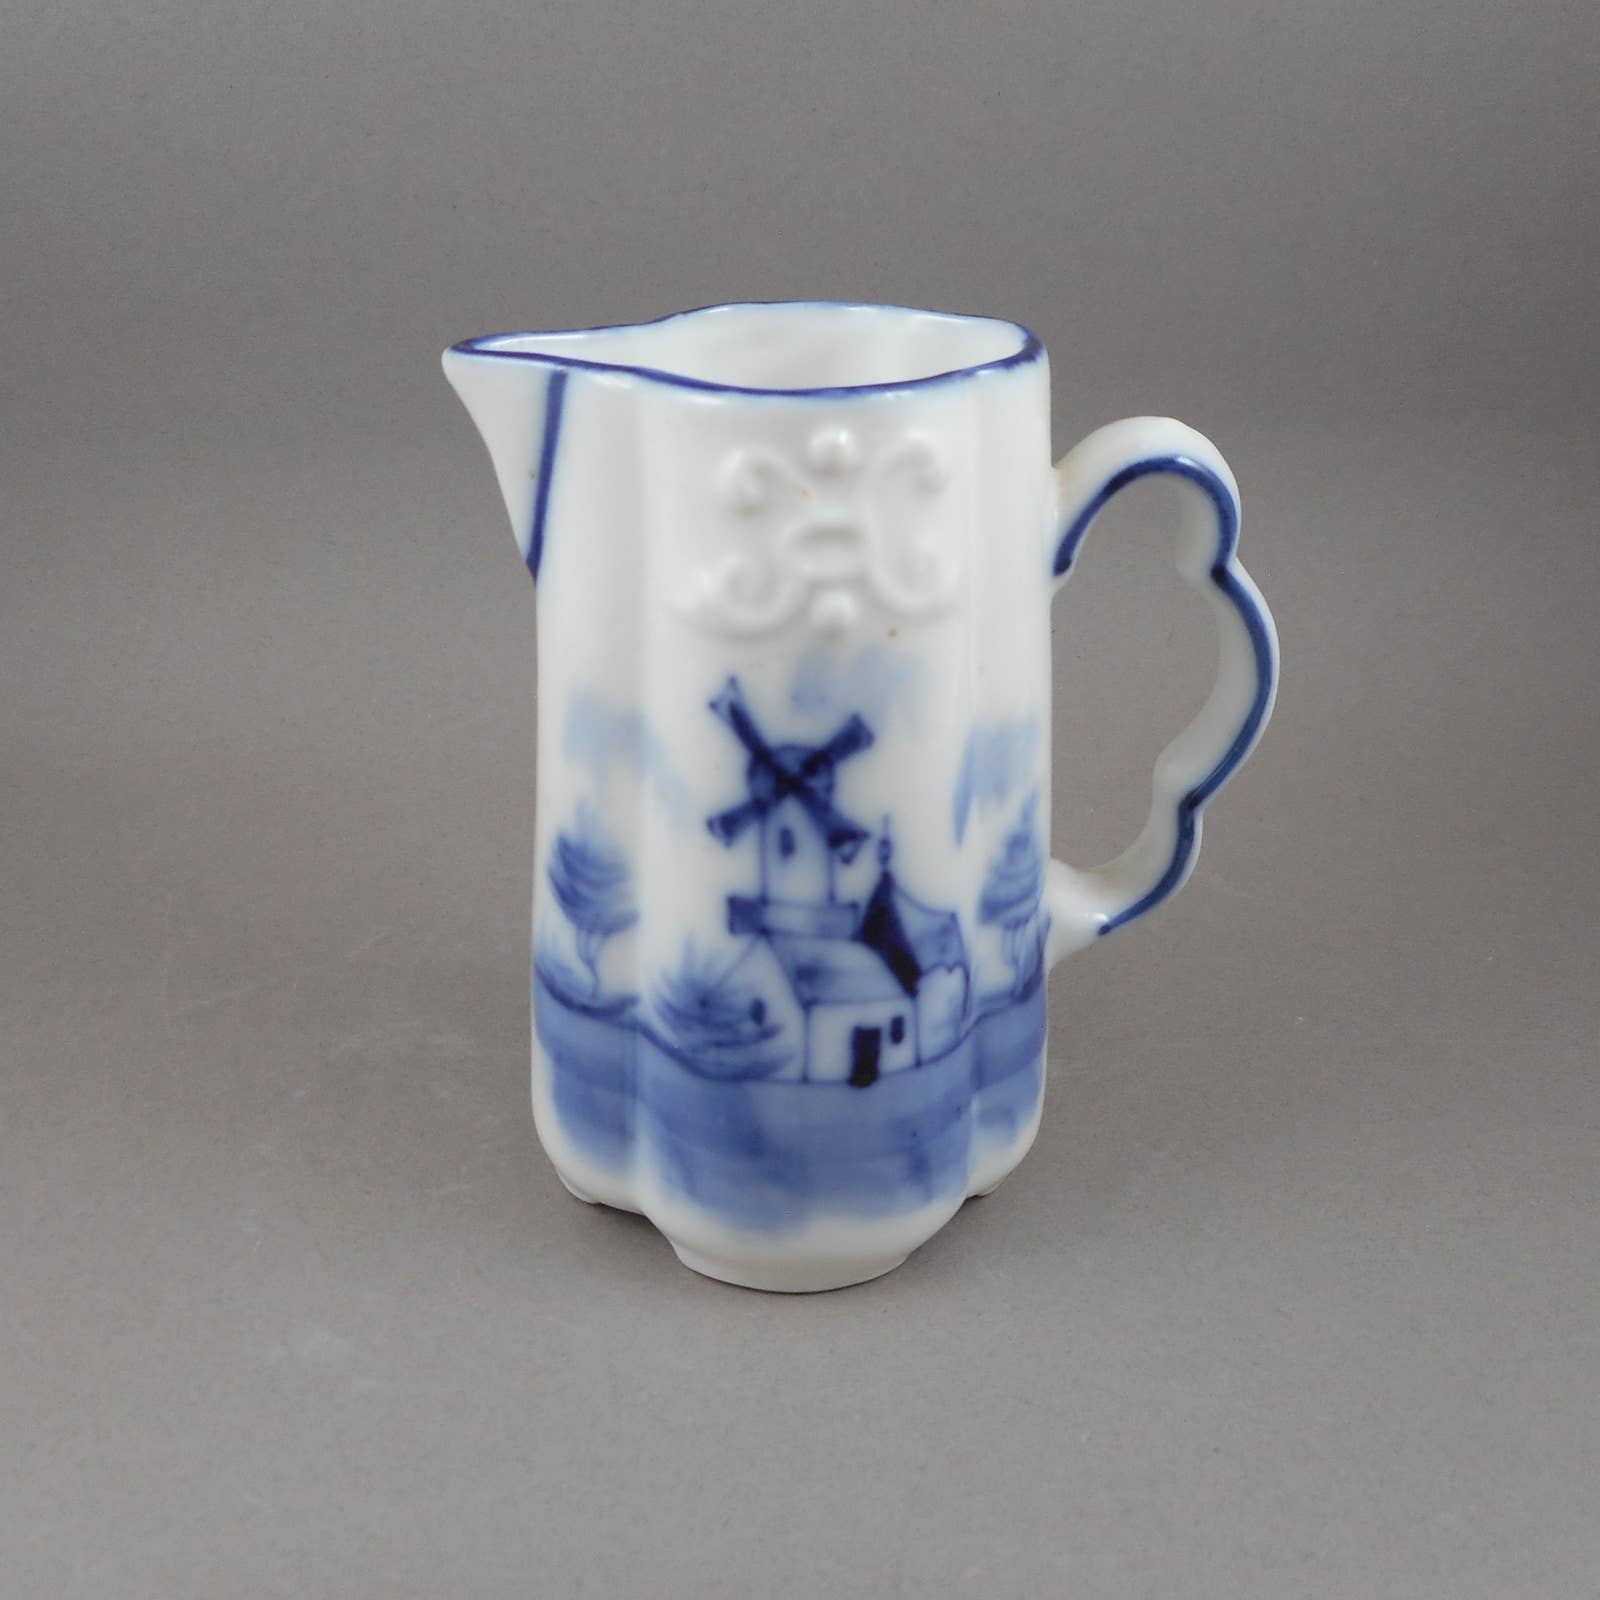 Vintage Small ceramic creamer pitcher with lid. White with Blue Bow on Lid